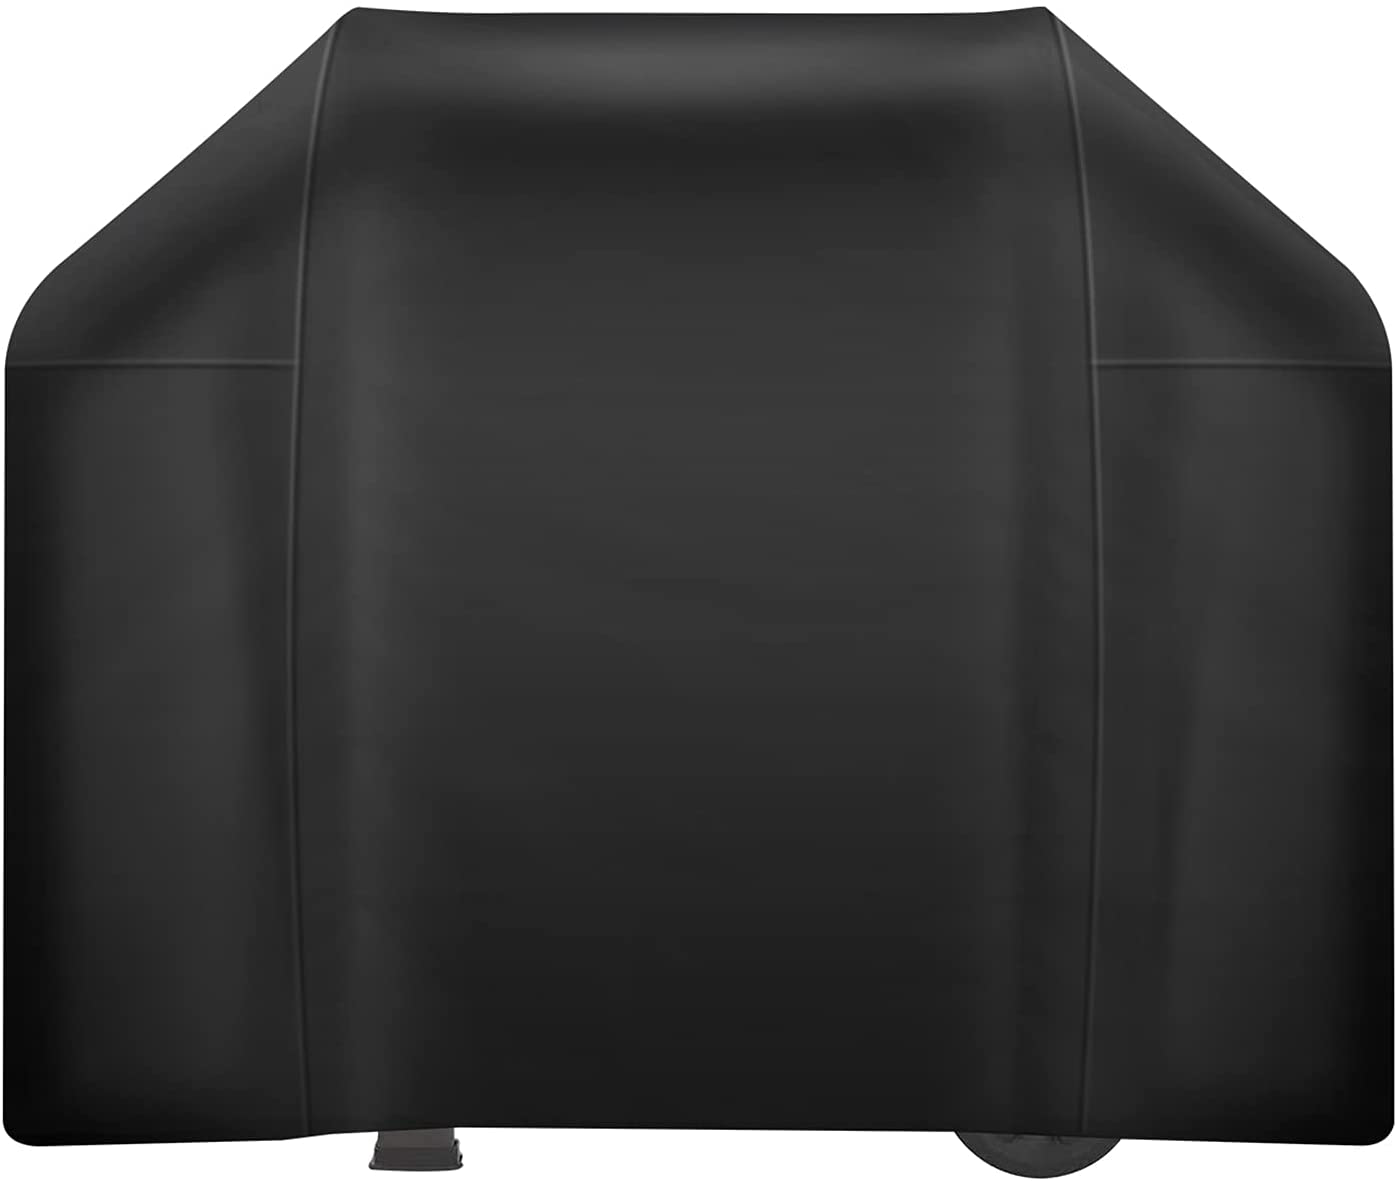 Grill Cover Waterproof Replacement 58 for Weber 7130 Genesis II LX 300 BBQ